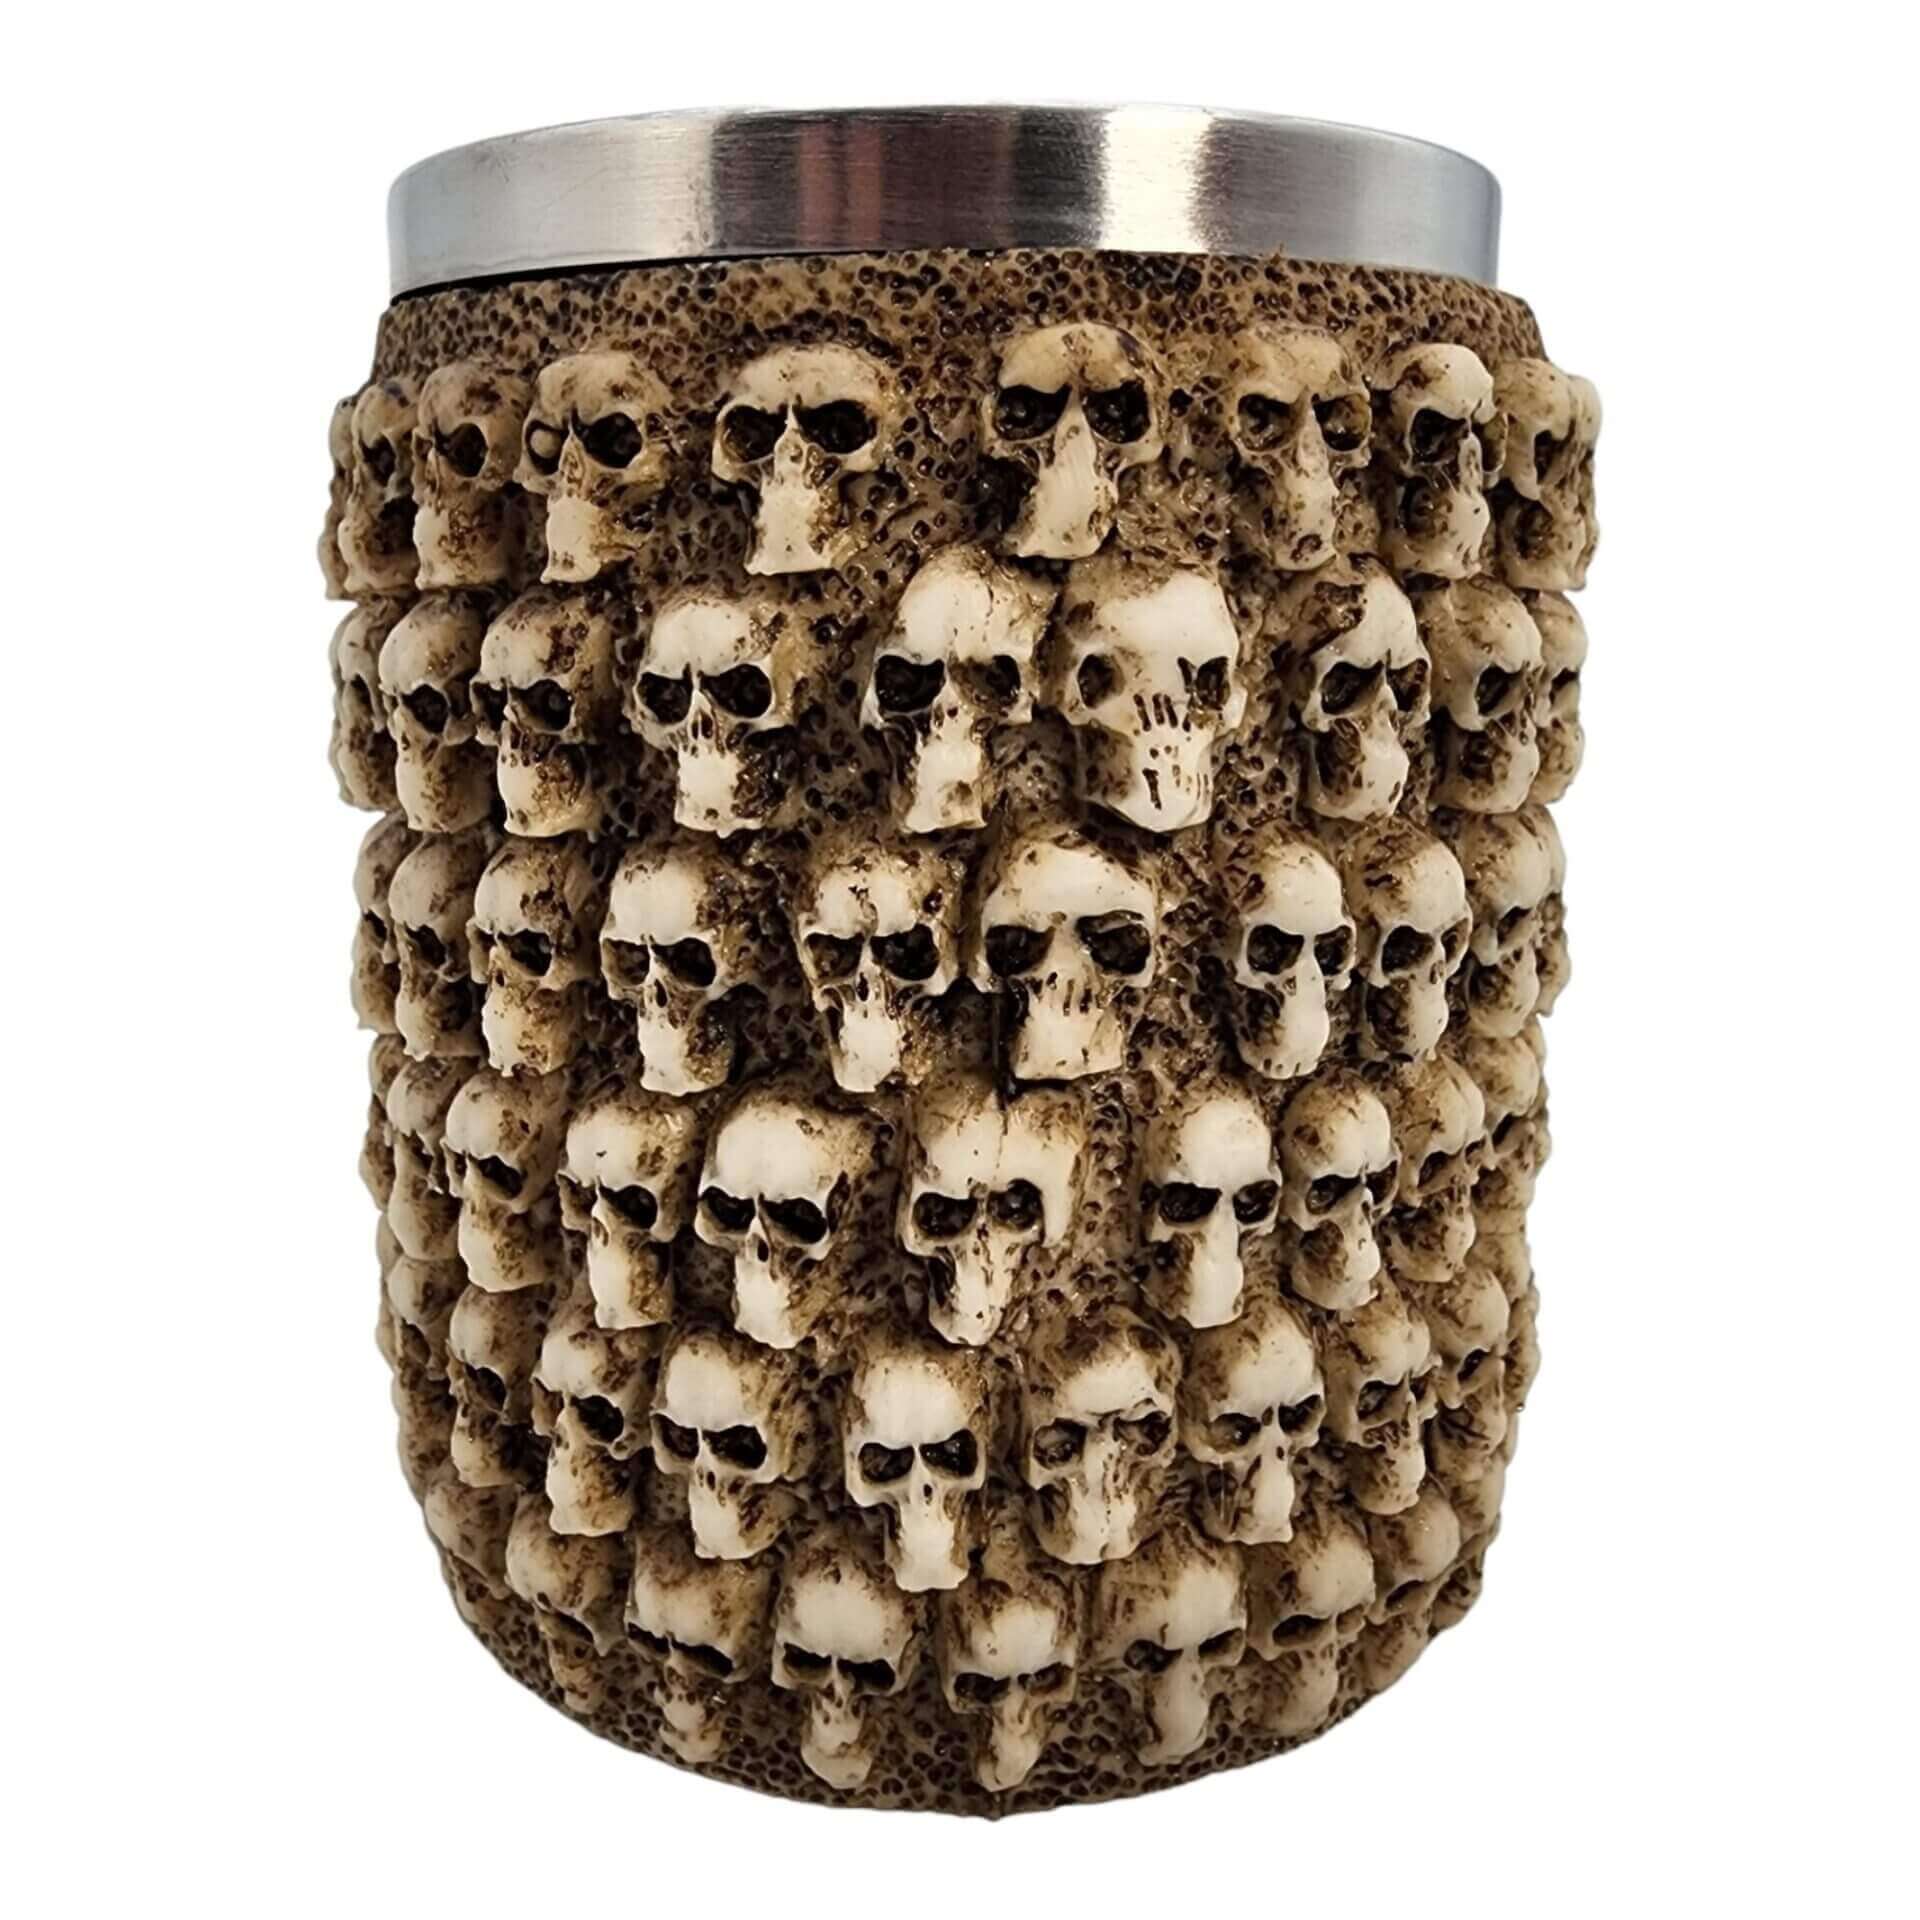 Catacombs Resin And Stainless Steel Hot/Cold Mug